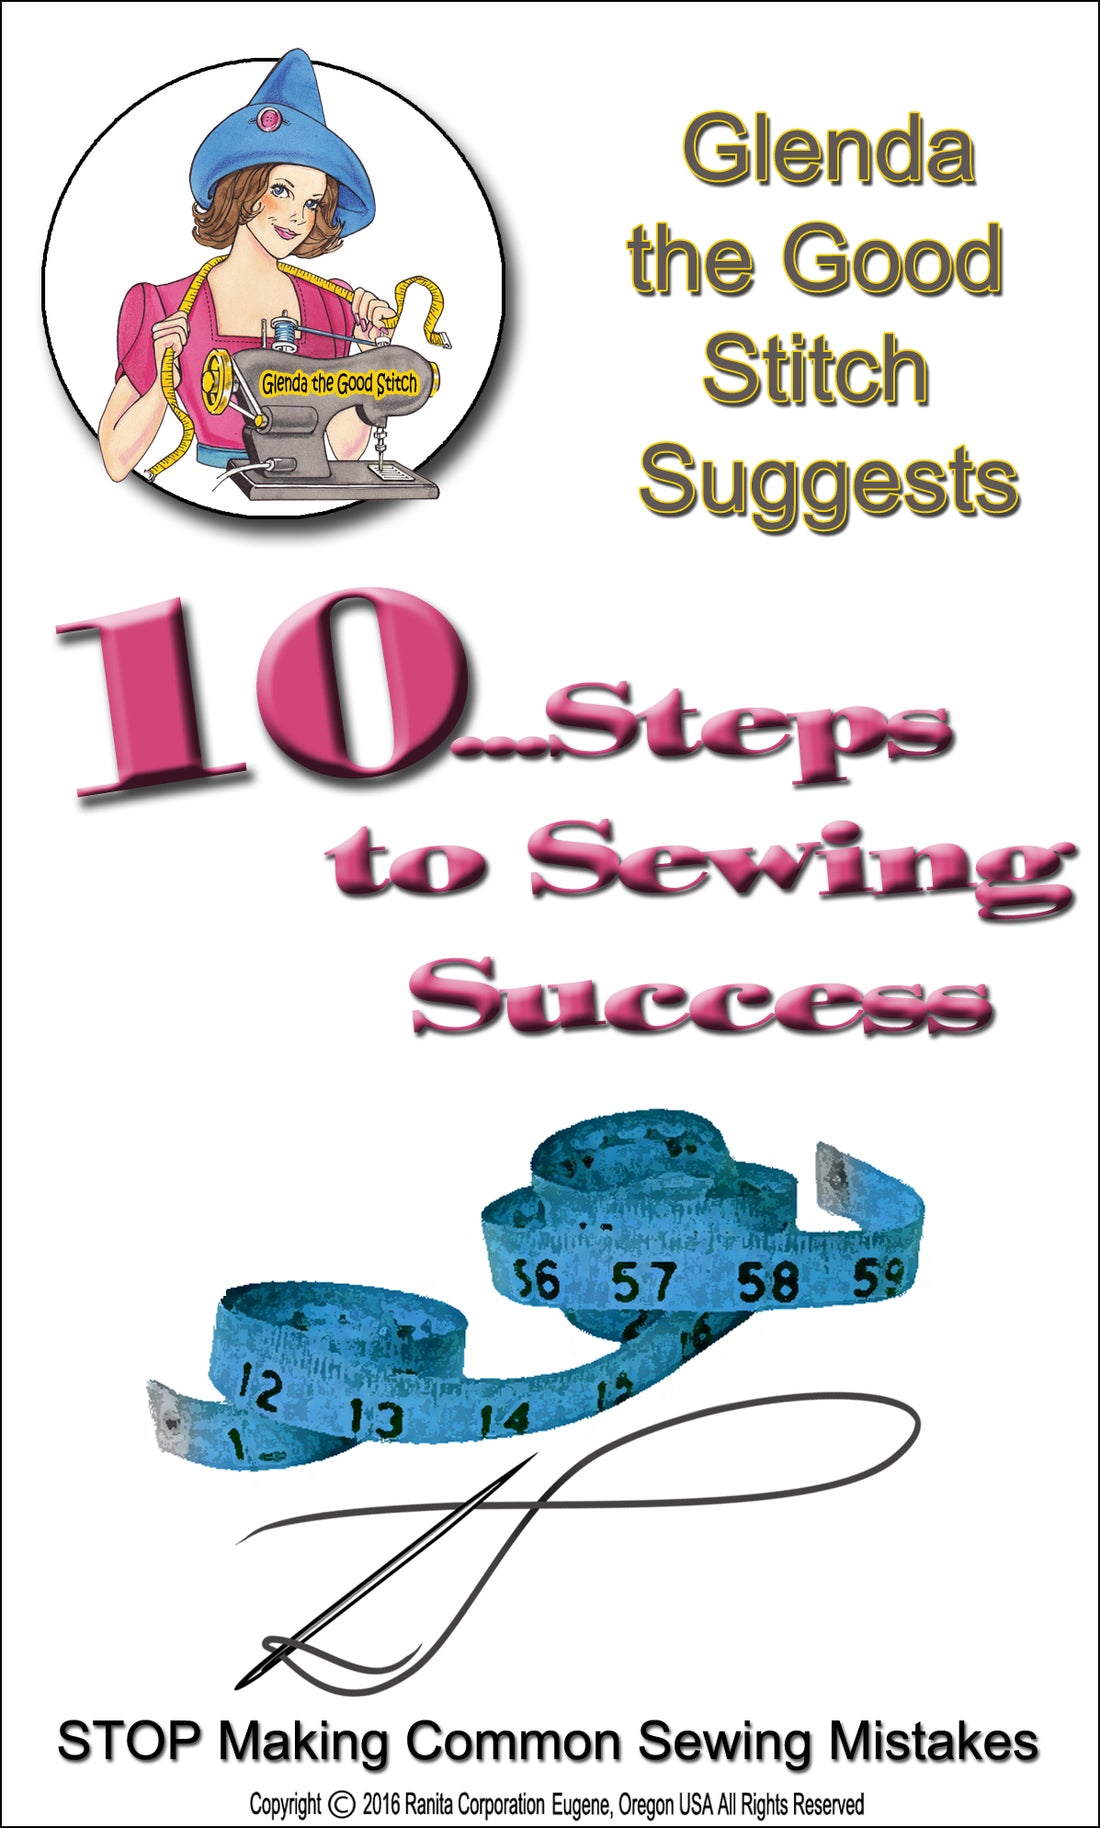 10 Steps for Sewing Success...says the Good Stitch!